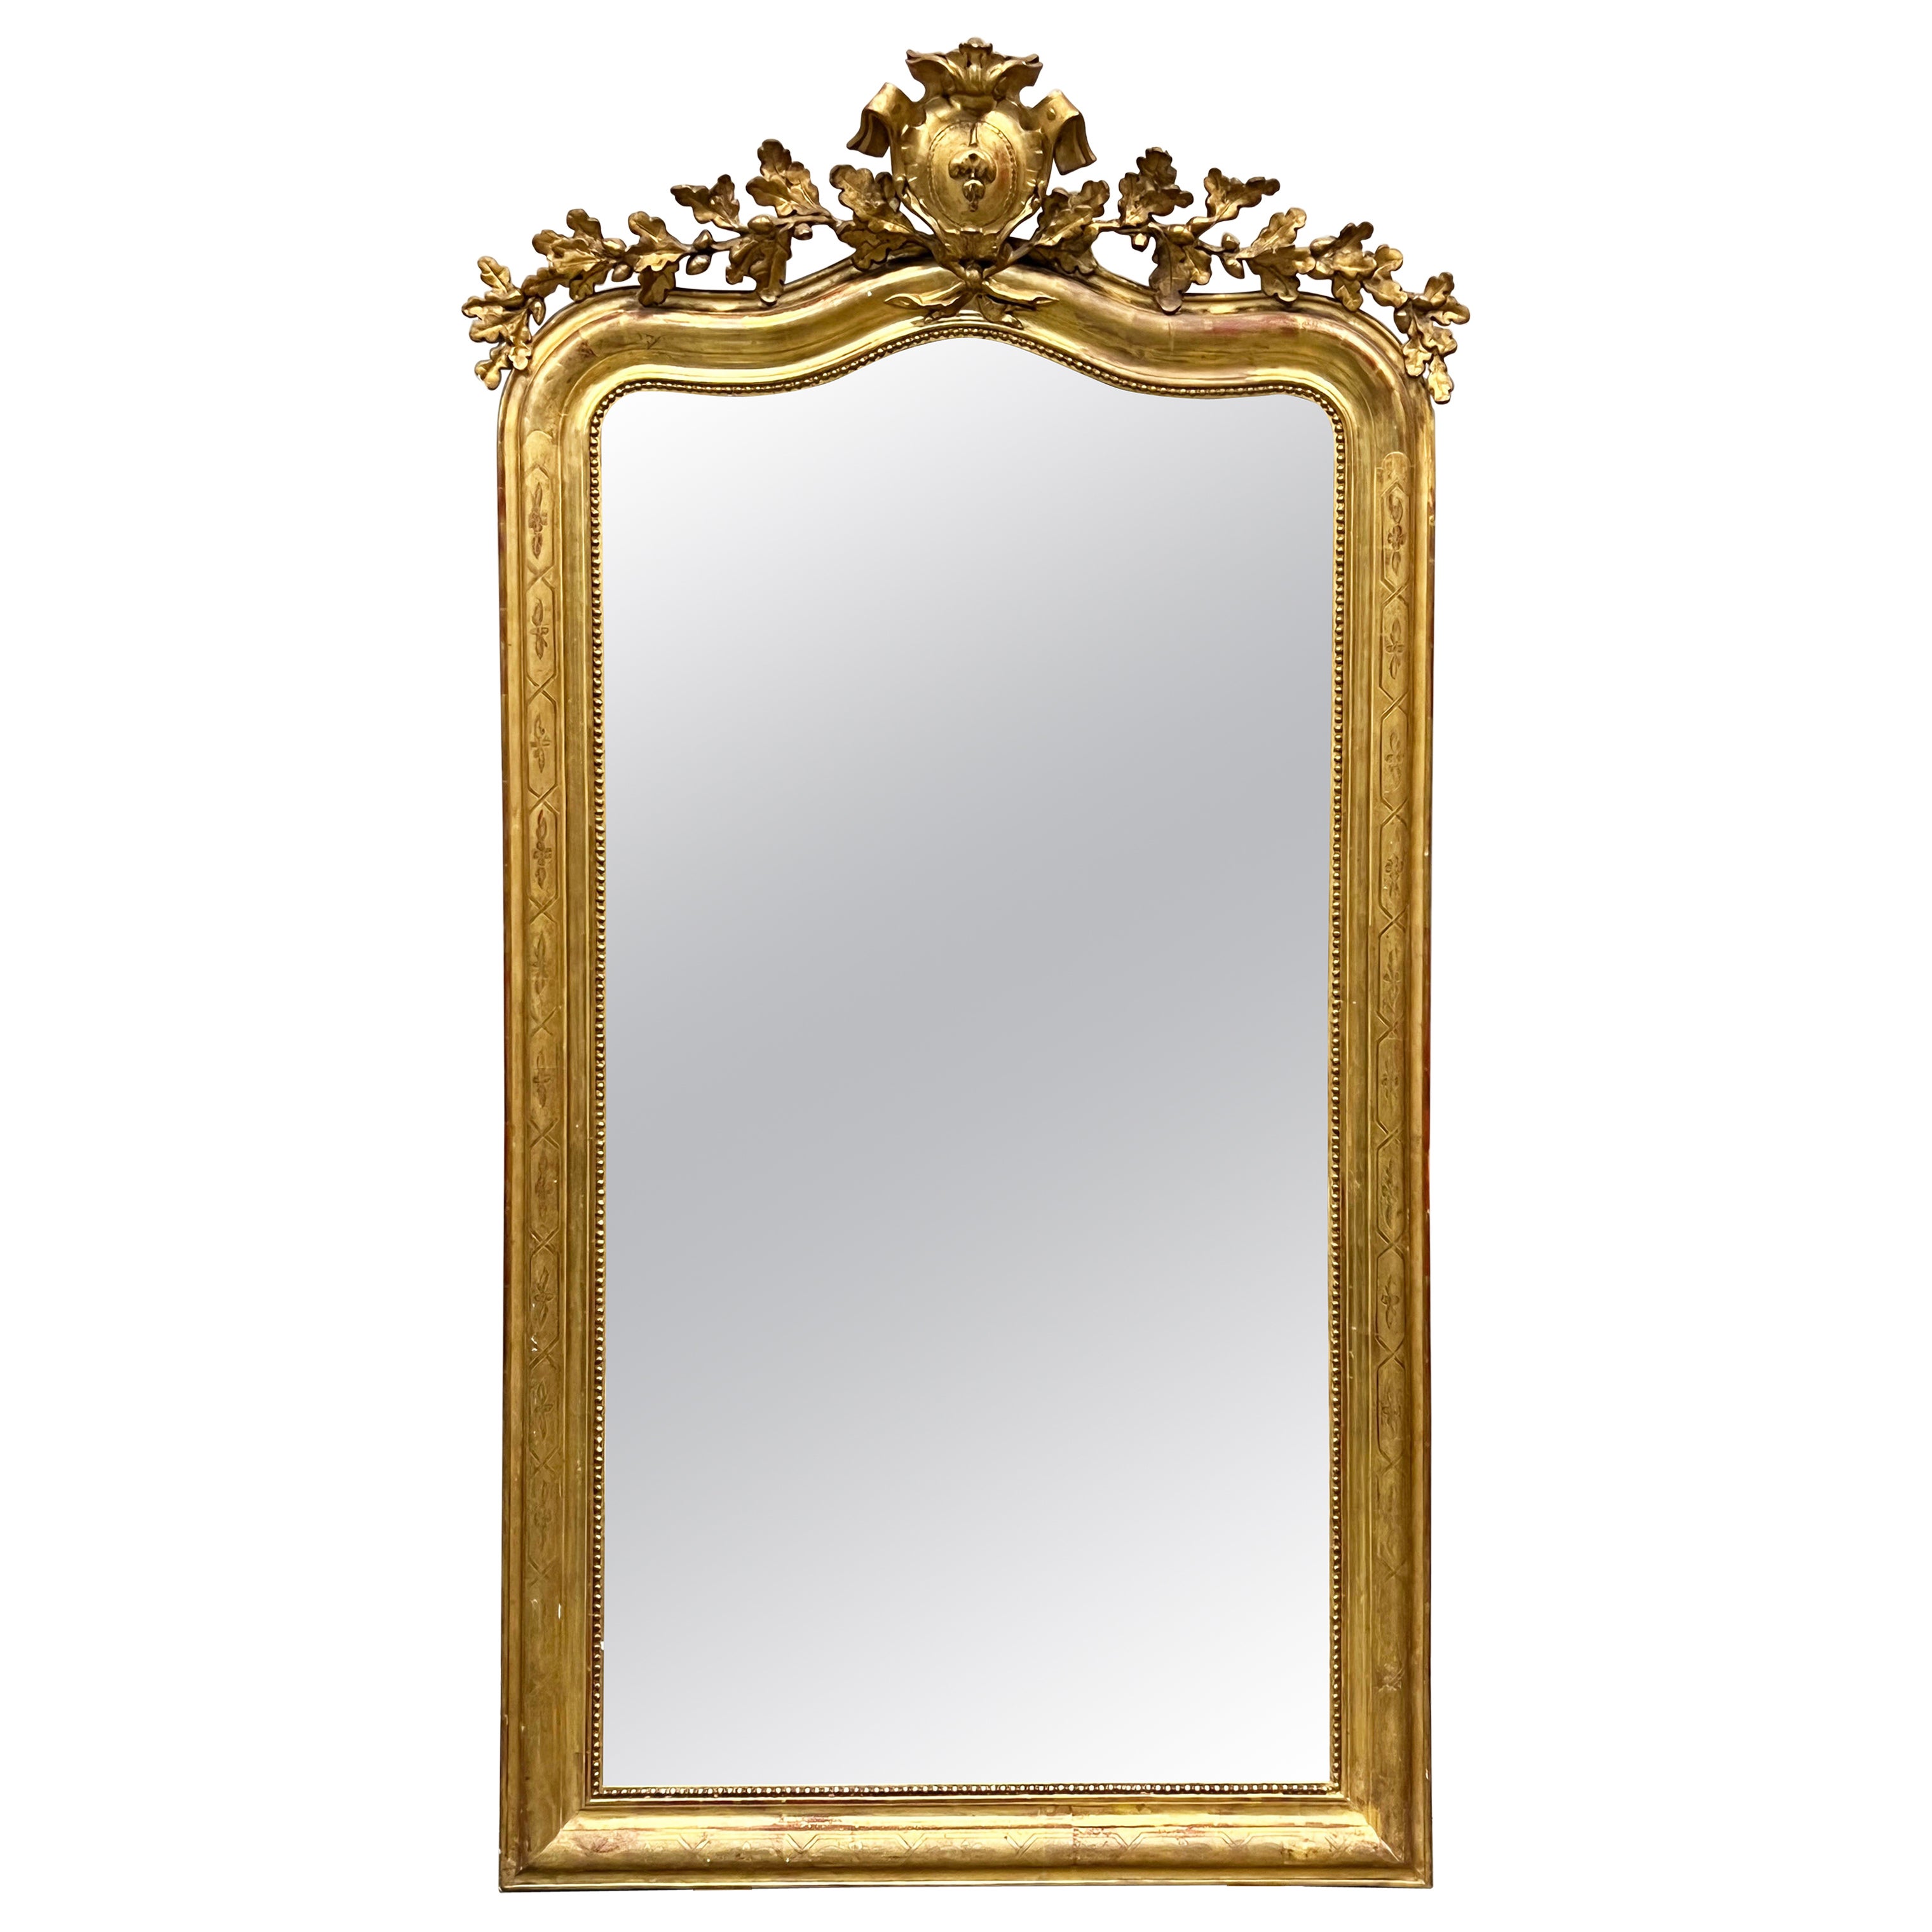 Mid 19th Century French Louis XVI Style Gold Gilt Mirror For Sale